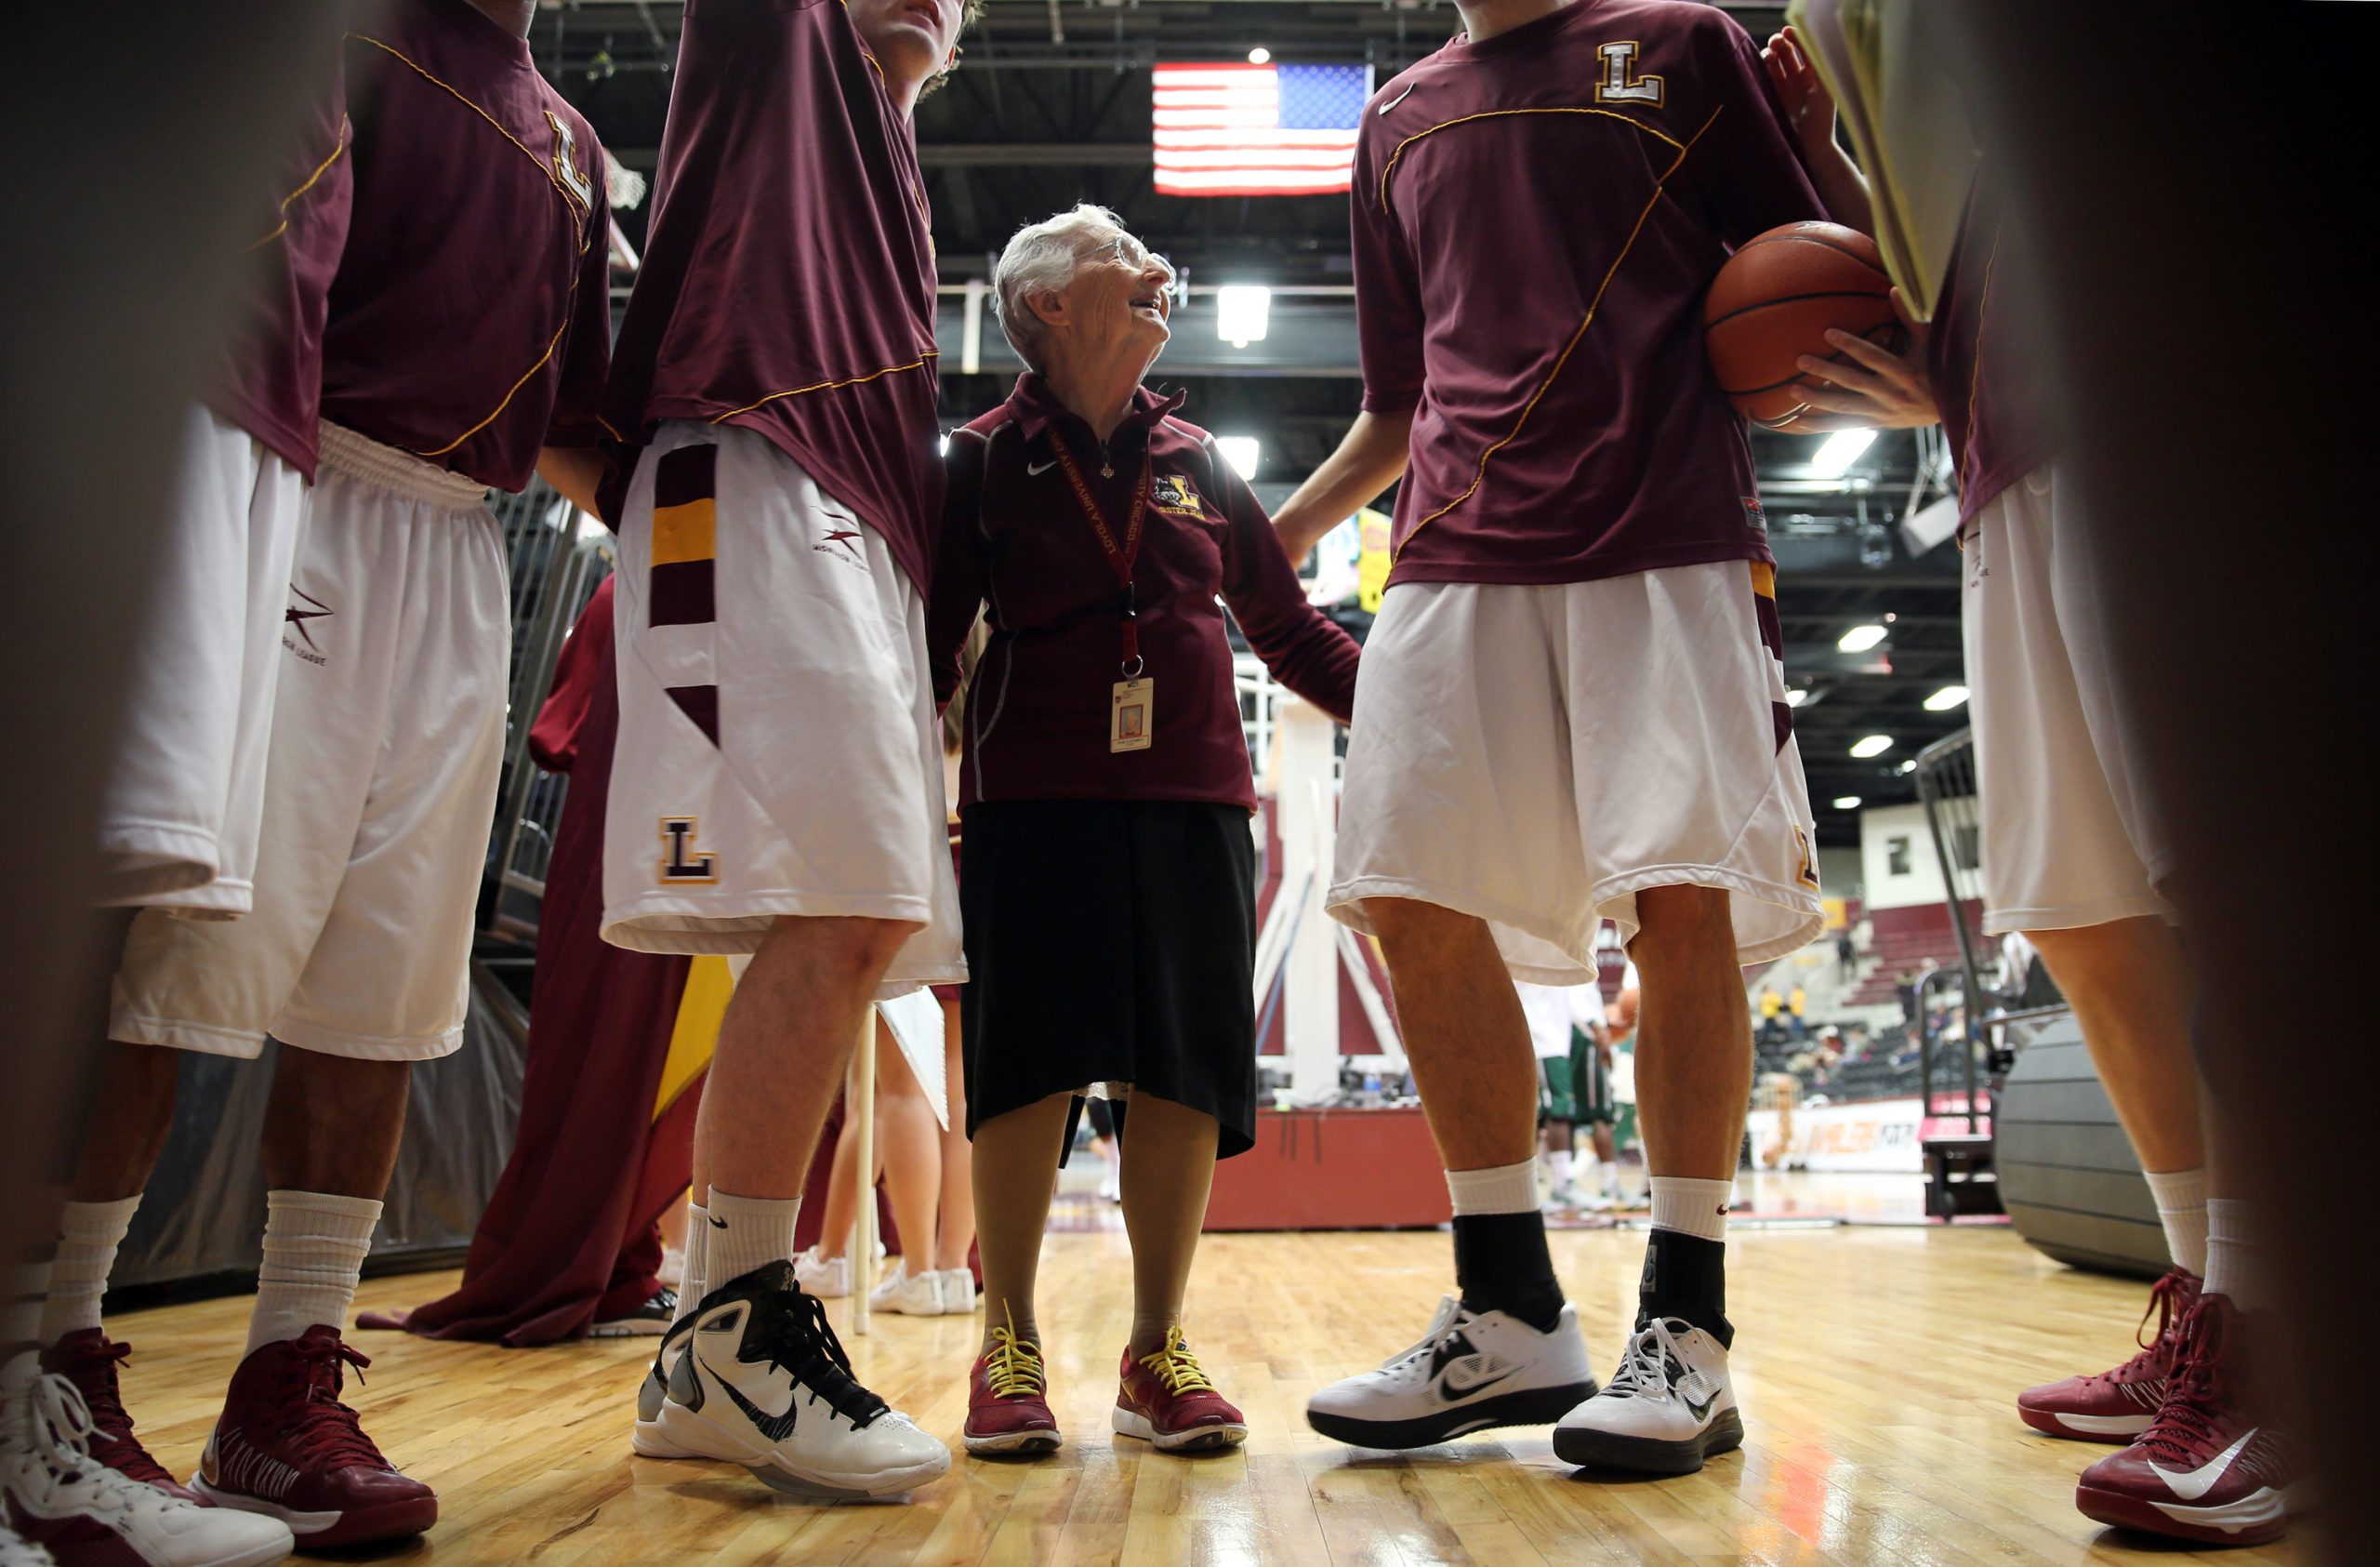 Sister Jean was granted her wish of going to see her Loyola Ramblers play this weekend.